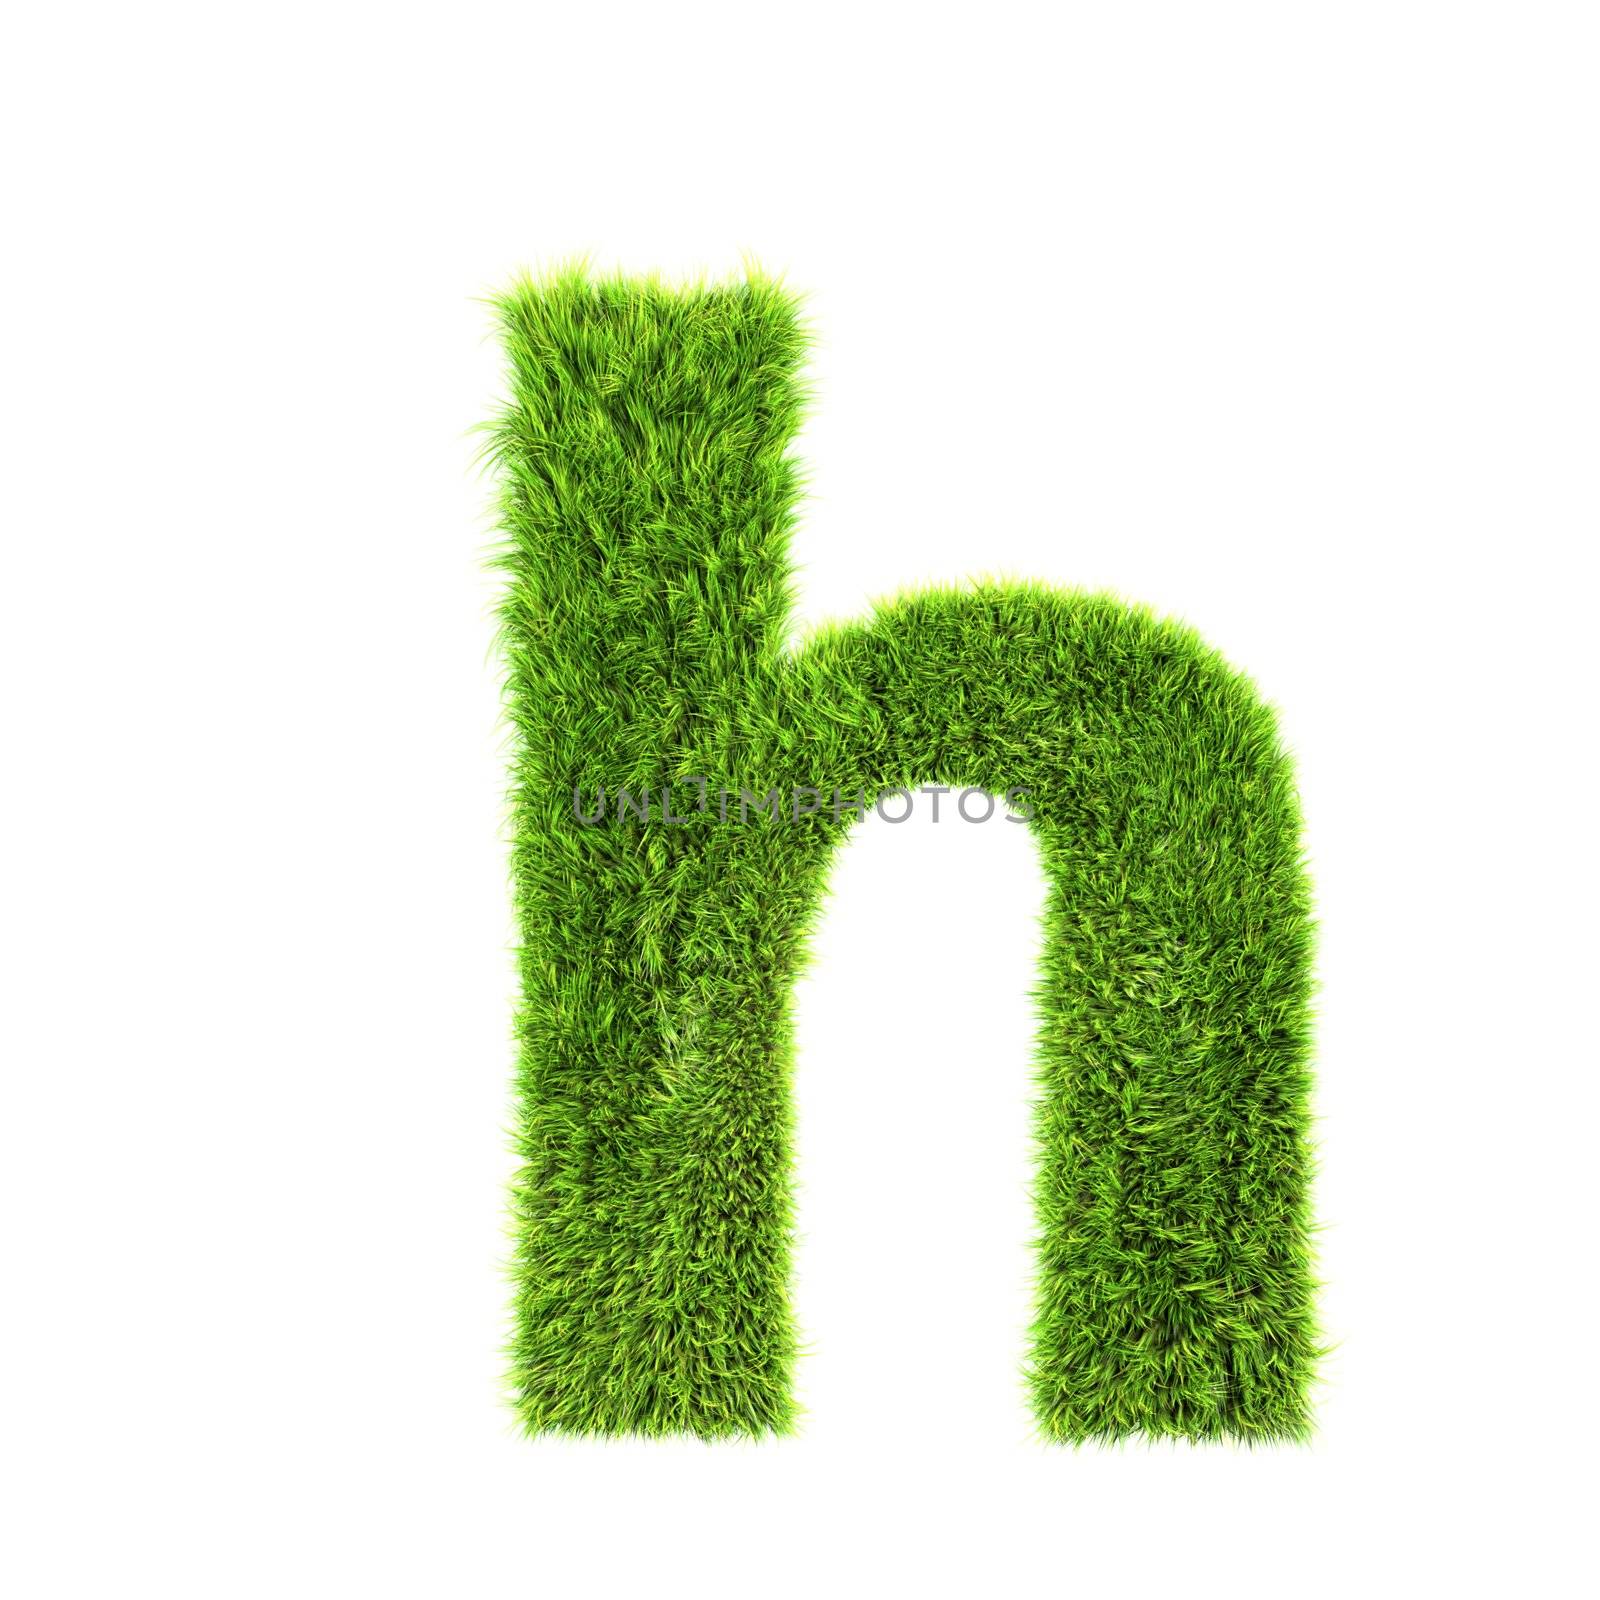 3d grass letter isolated on white background - h by chrisroll